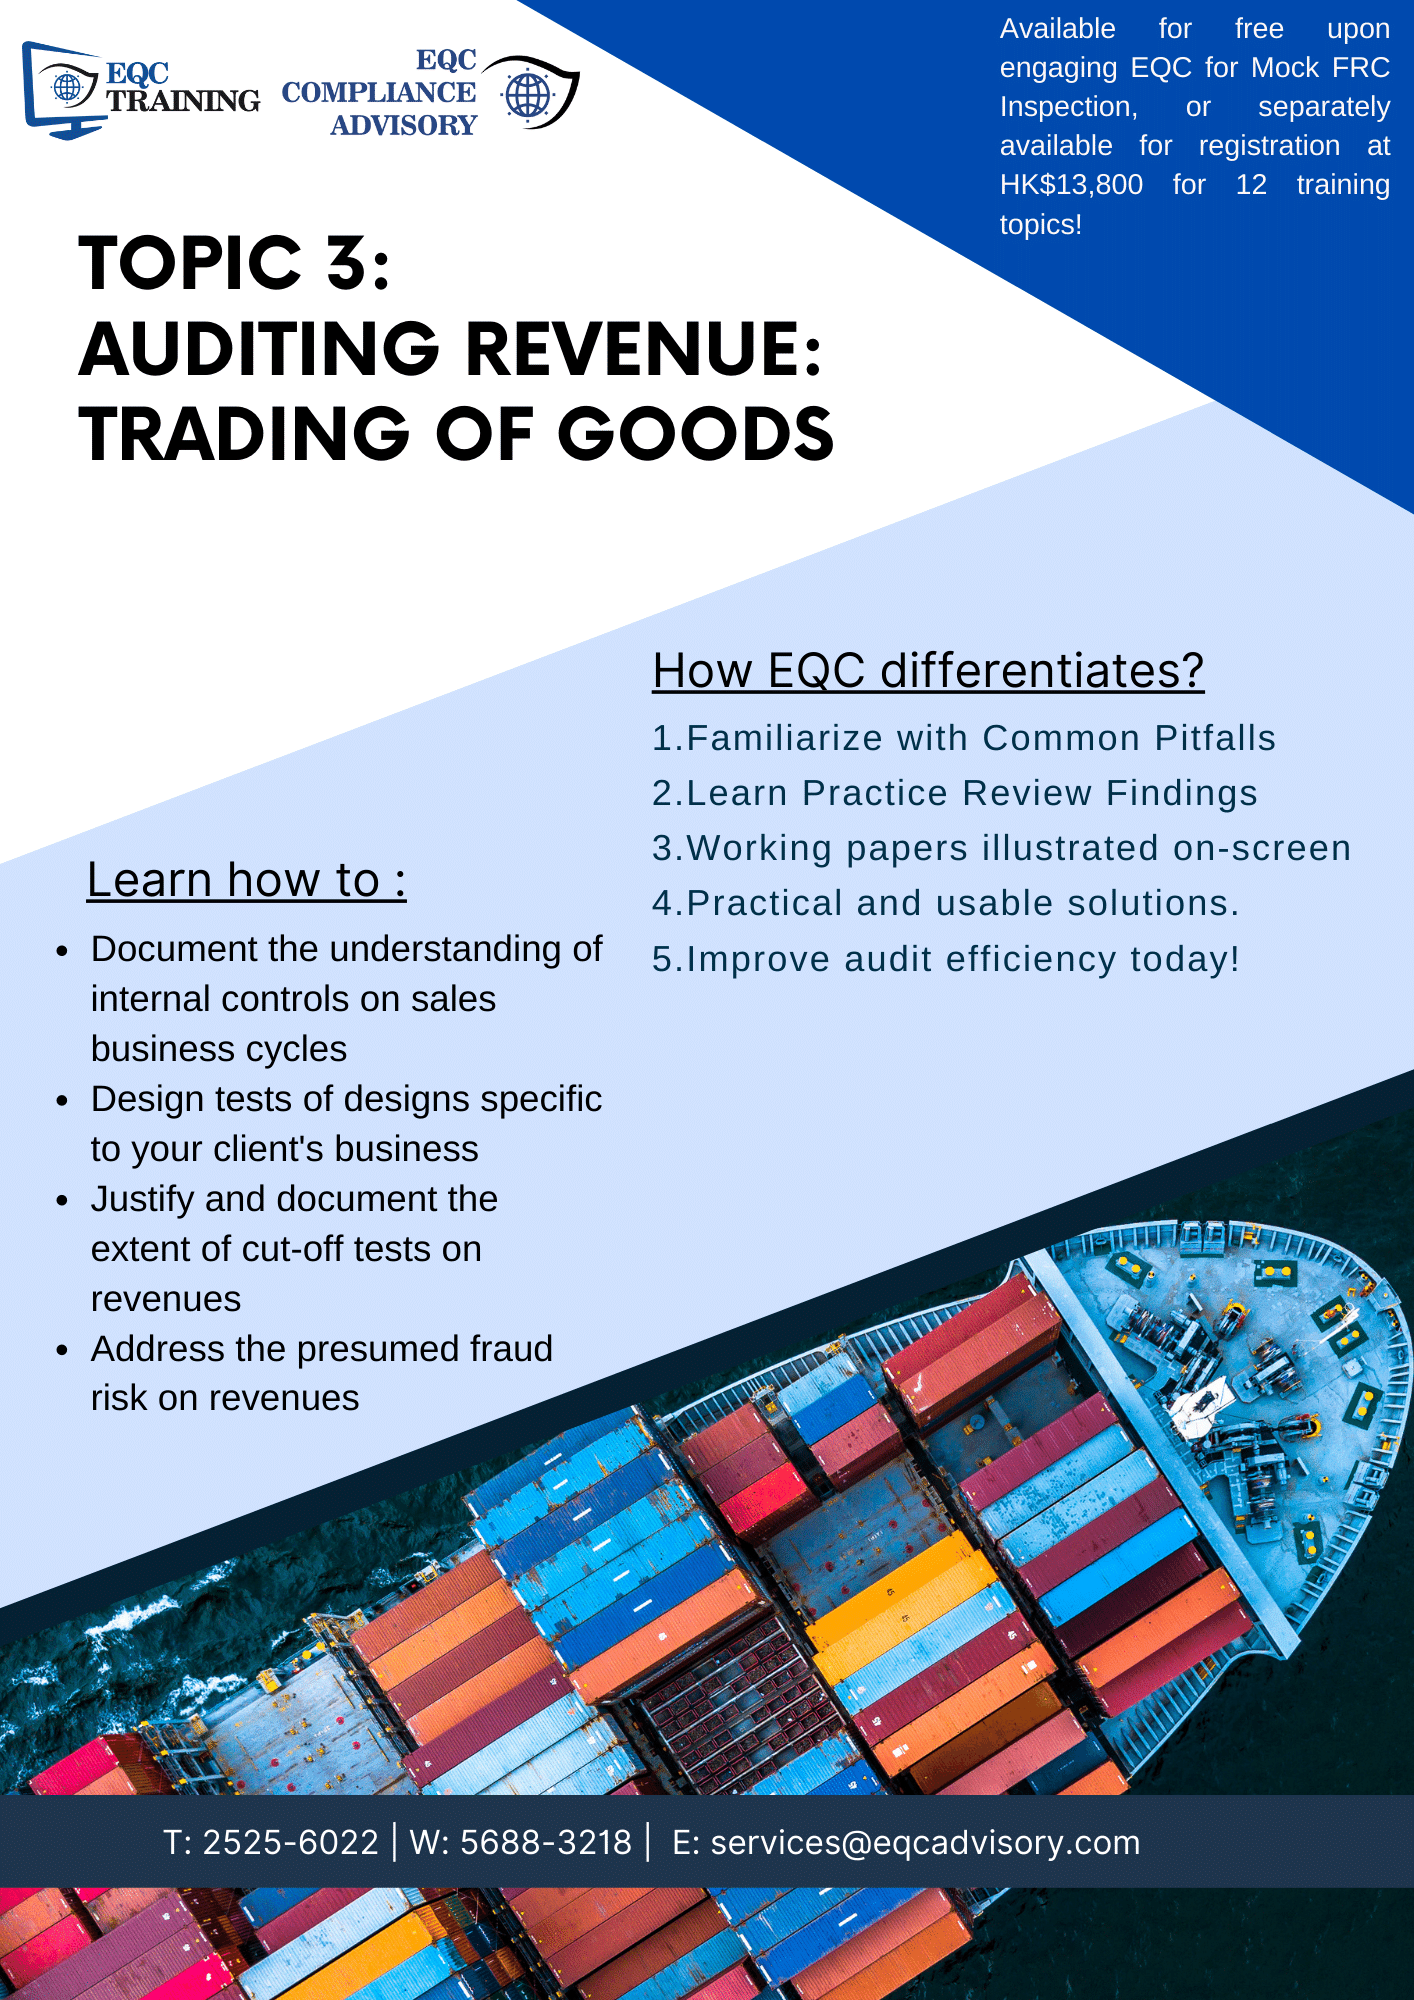 Topic 03 - Auditing Revenue - Trading of Goods